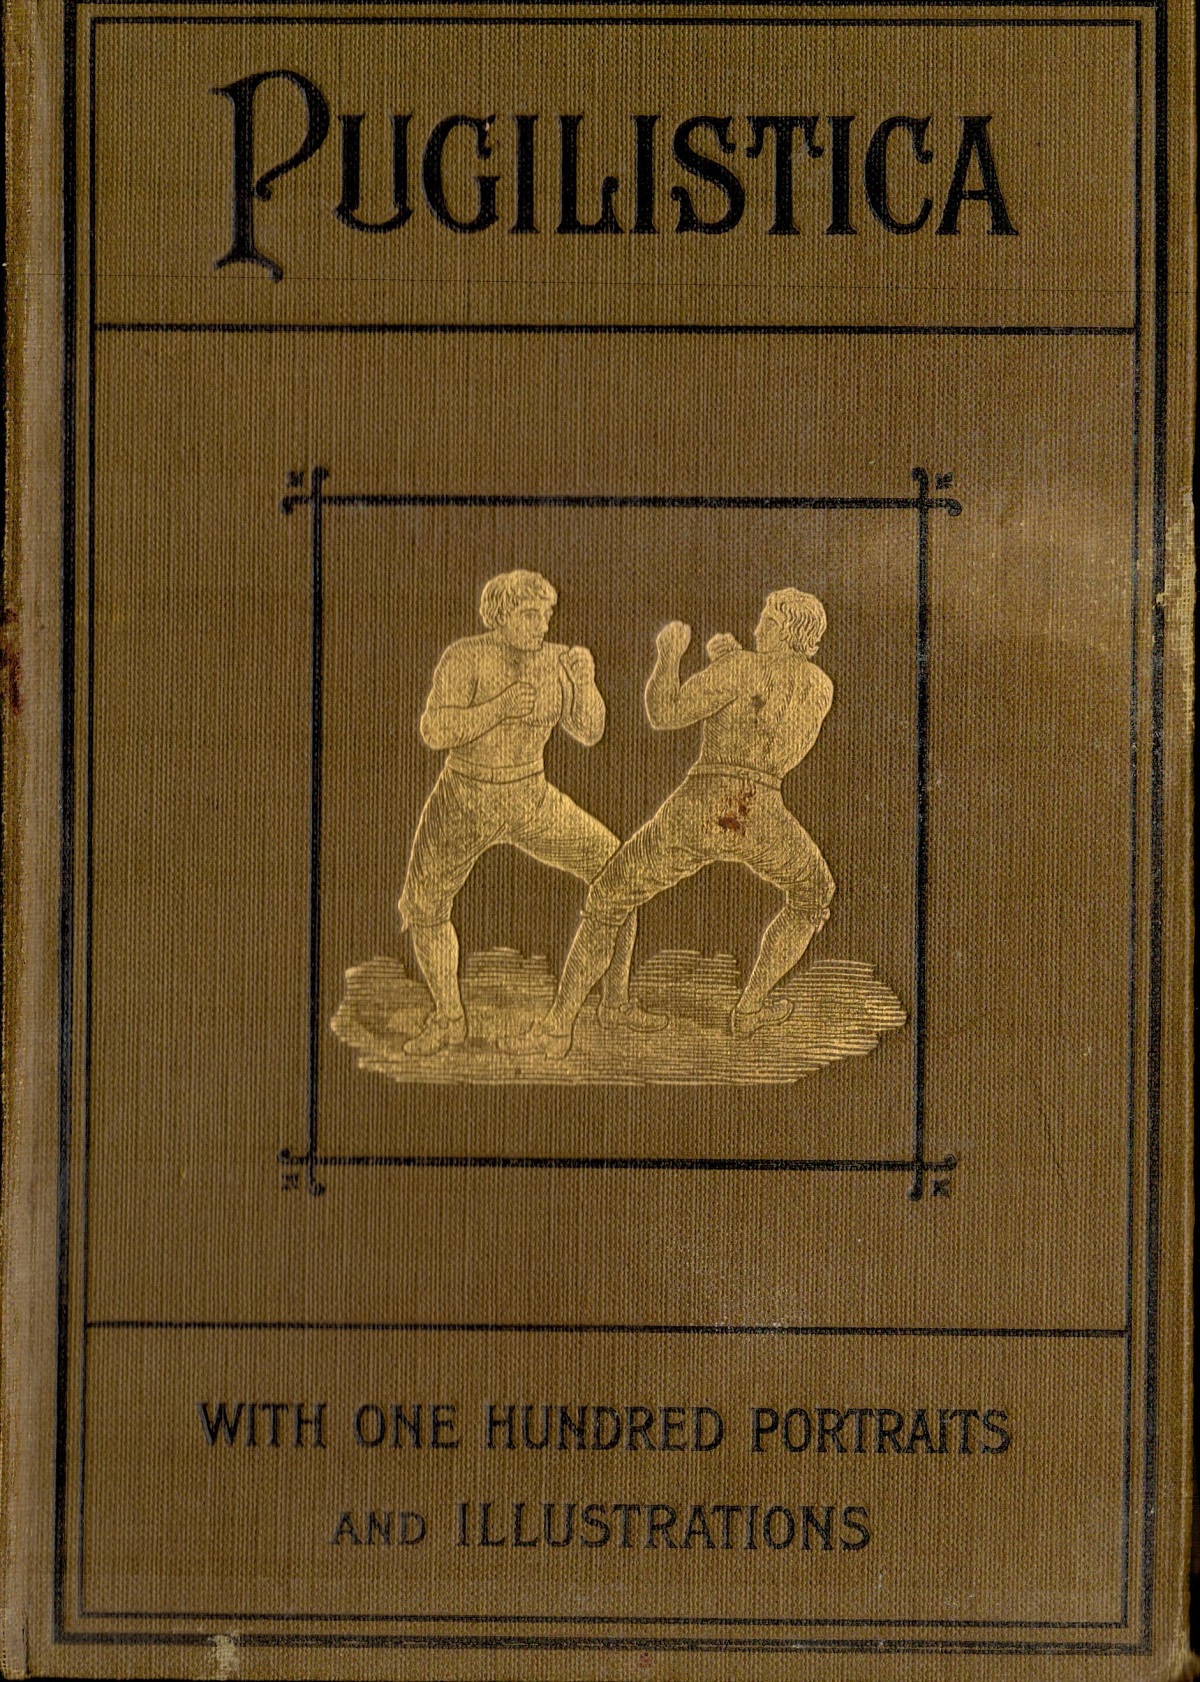 Pugilistica with 100 Portraits and Illustrations by Henry Downes Miles 144 Years of British Boxing